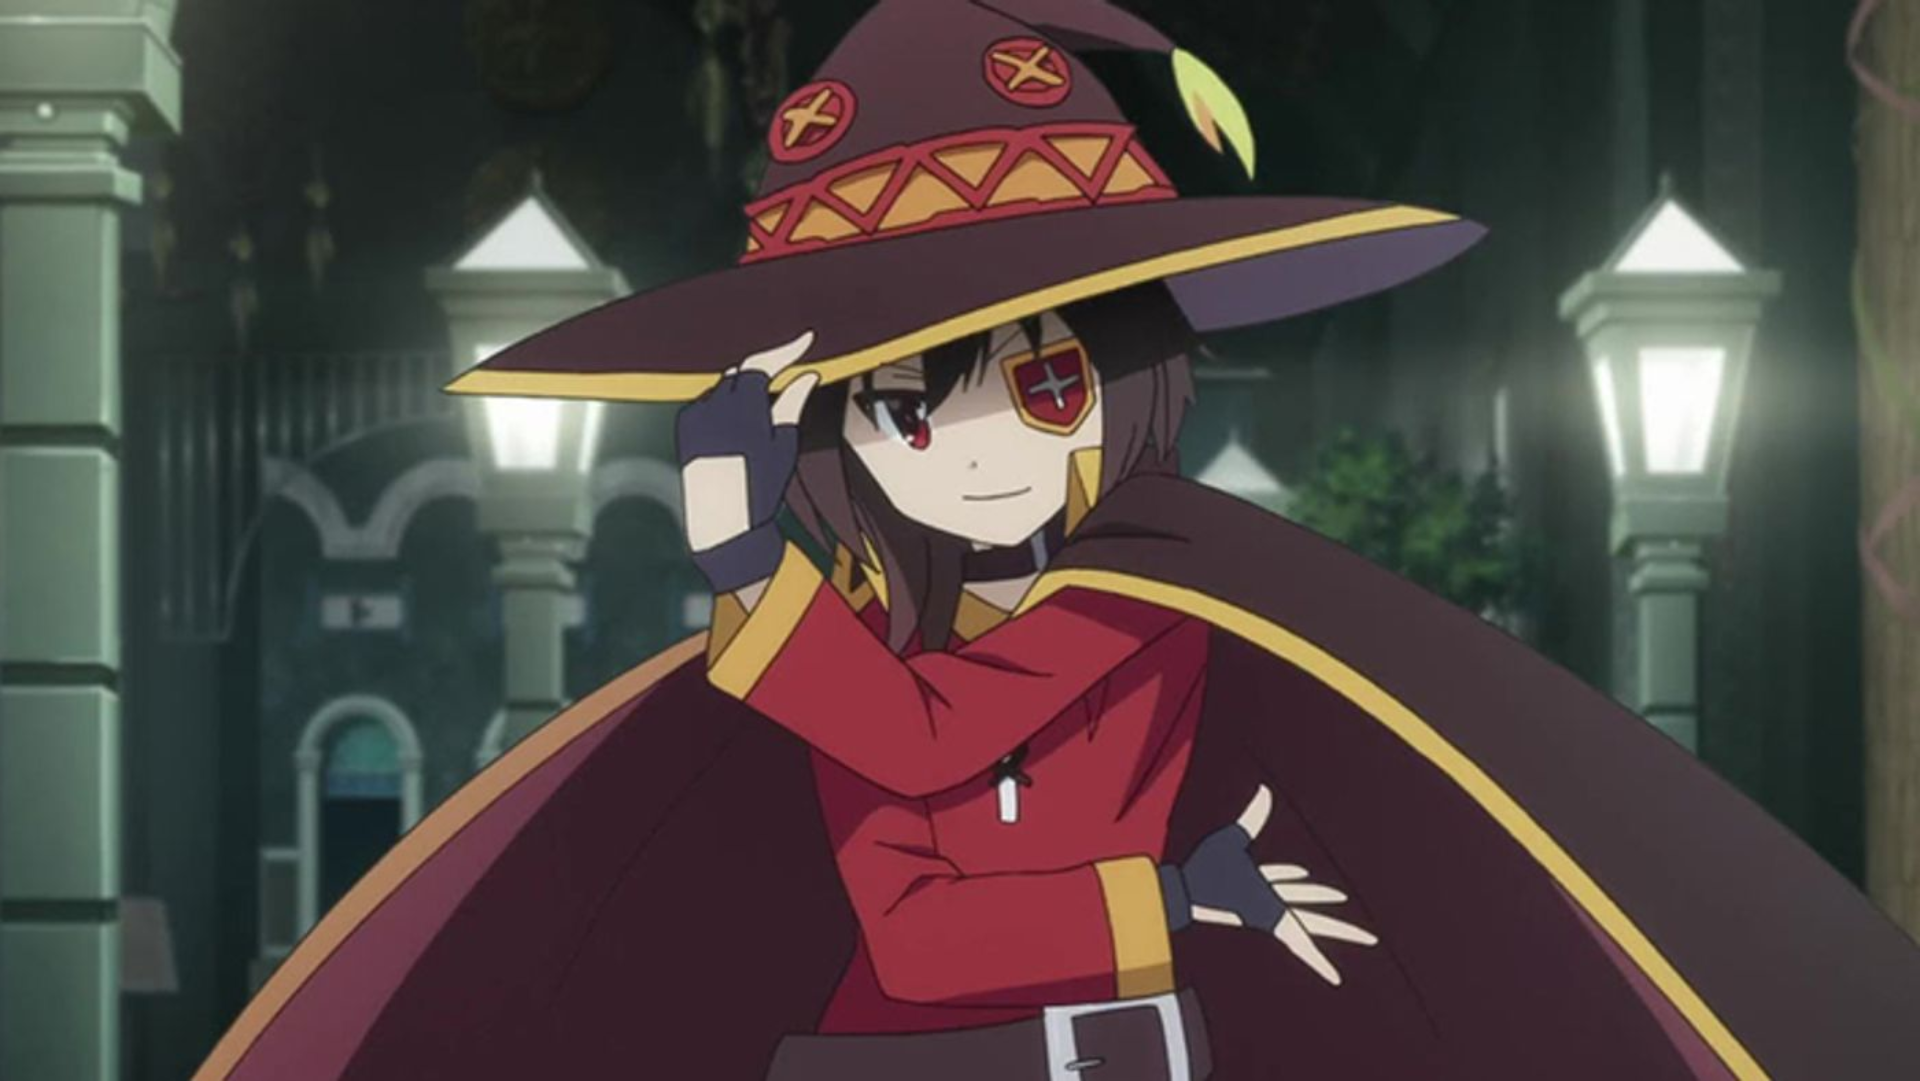 Konosuba: Megumin Spin-Off Anime to Get First Trailer on August 26